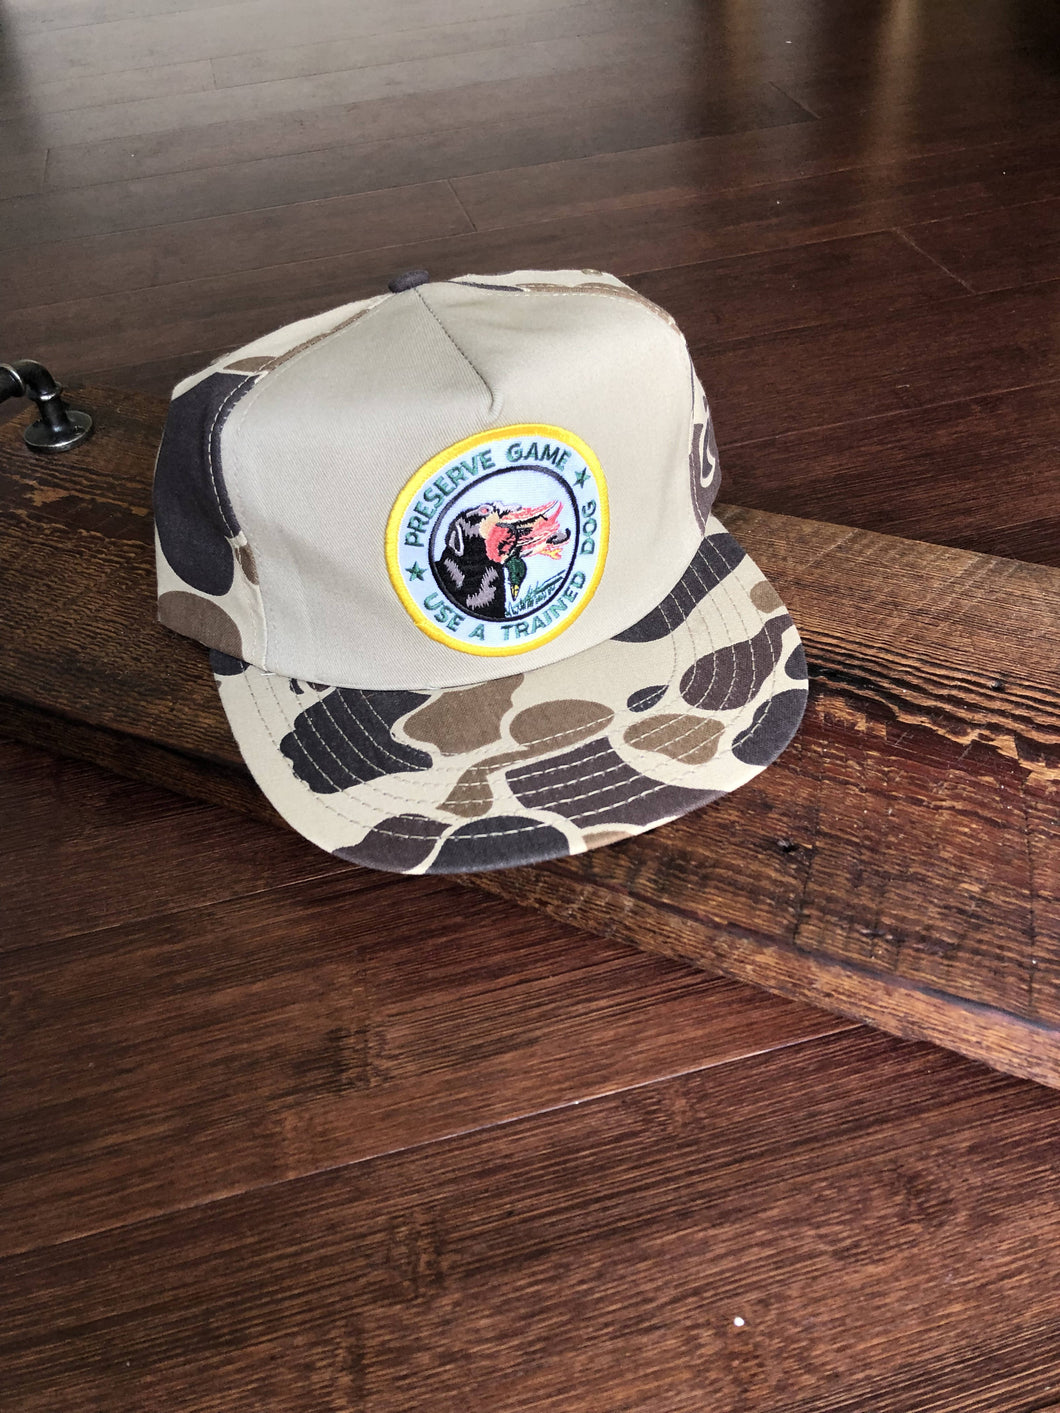 Preserve Game Use a Trained Dog Vintage Camo Hat